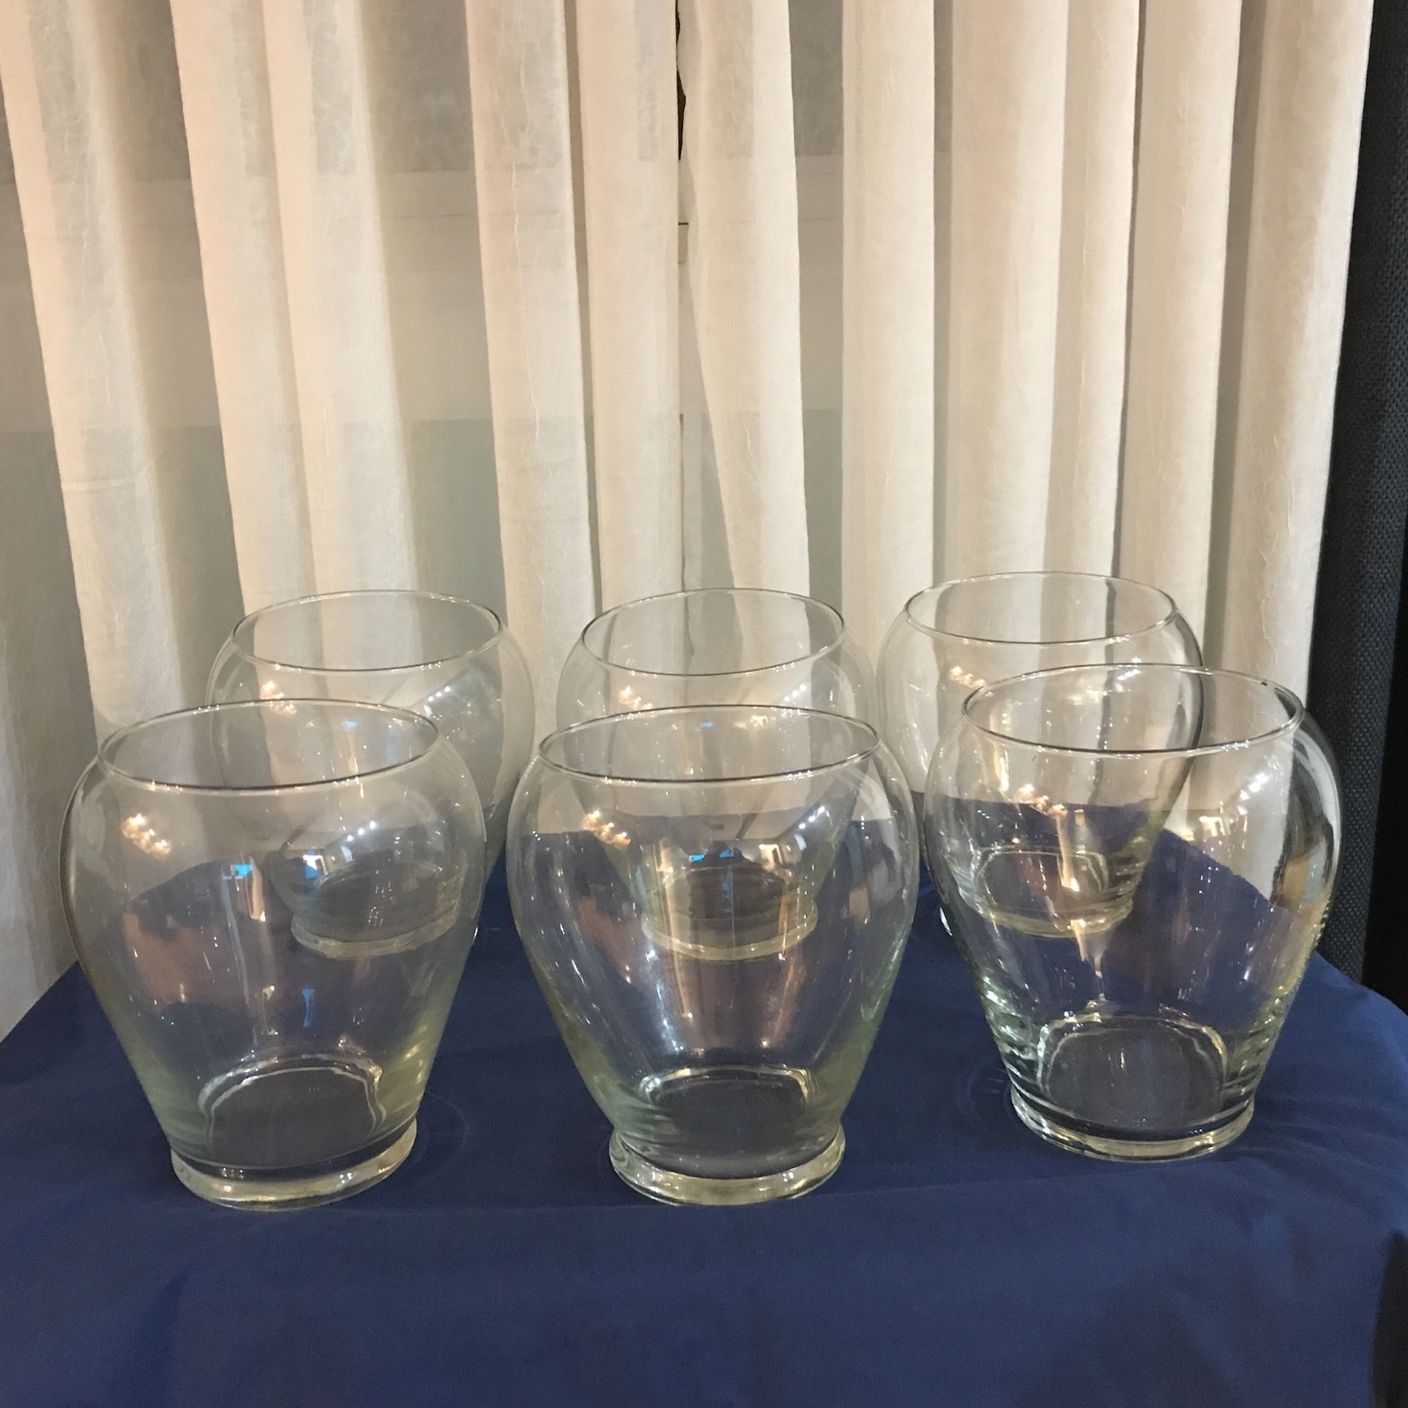 Clear  Glass Vases 8 inch Tall ...heavy  6 For 10.00